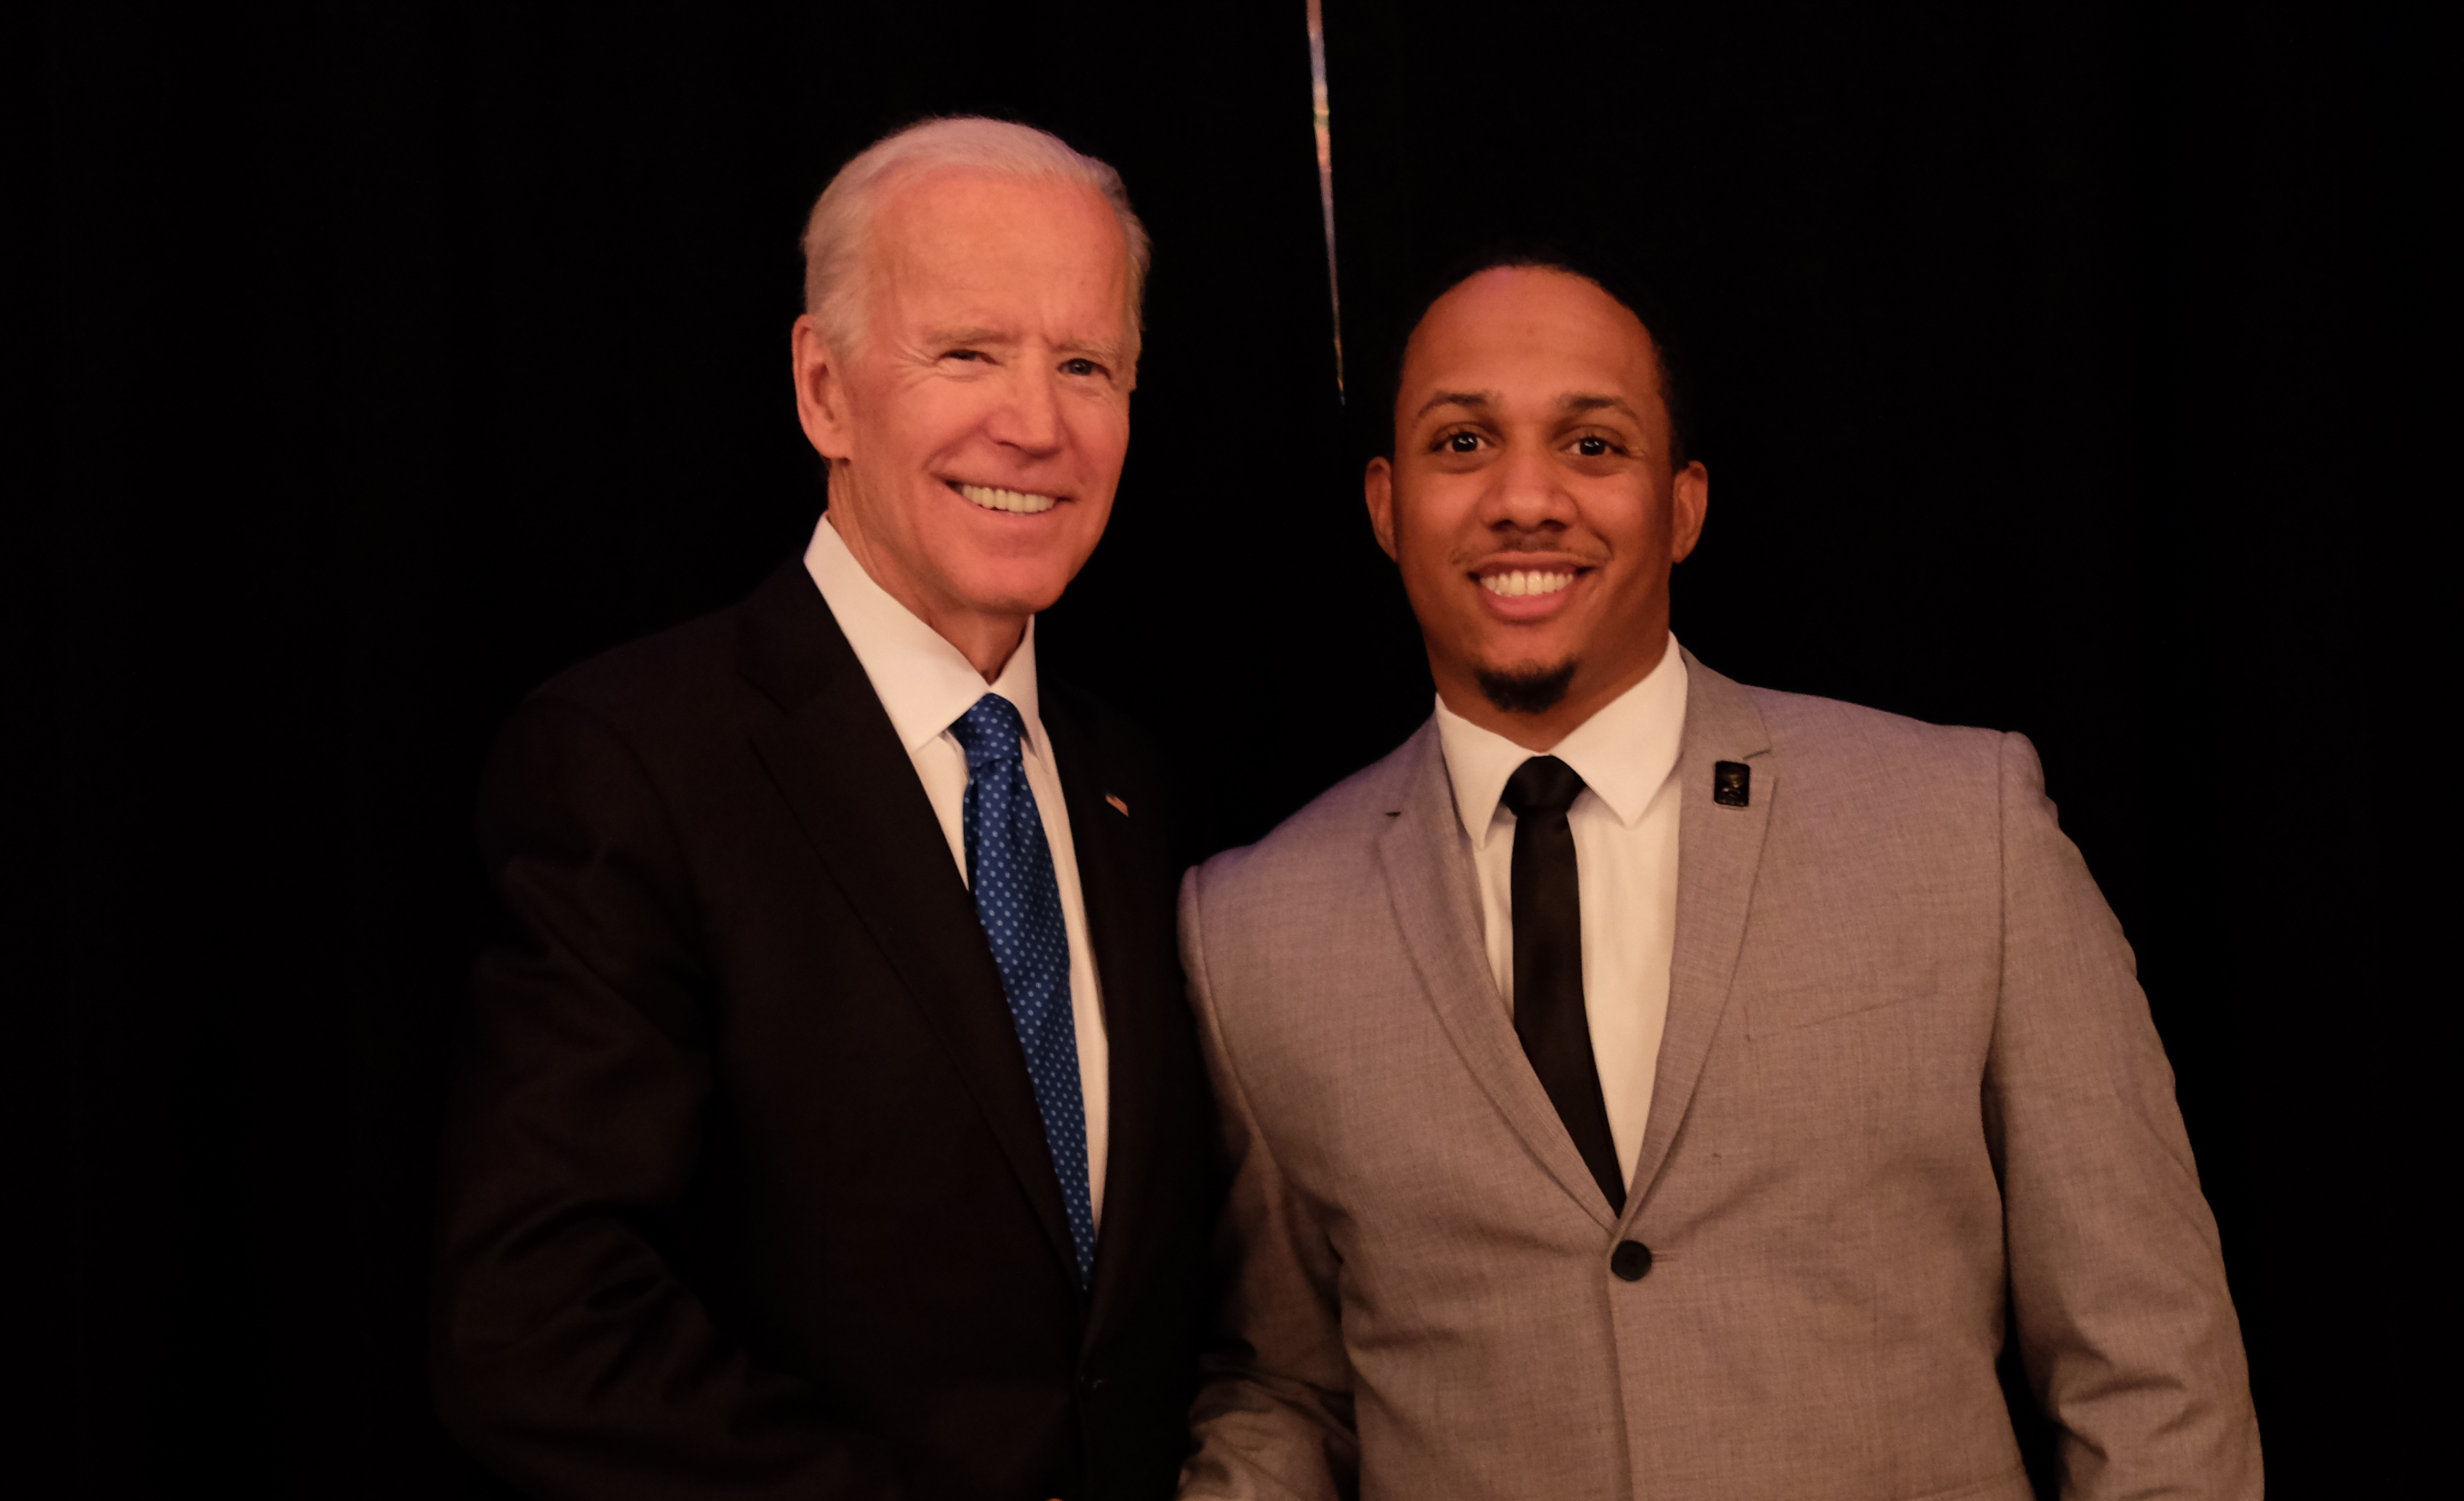 Former U.S. Vice President Joe Biden (l) congratulates Kyle Sheppard after presenting him the Biden Courage Award for his work at DSU to prevent sexual and domestic abuse.